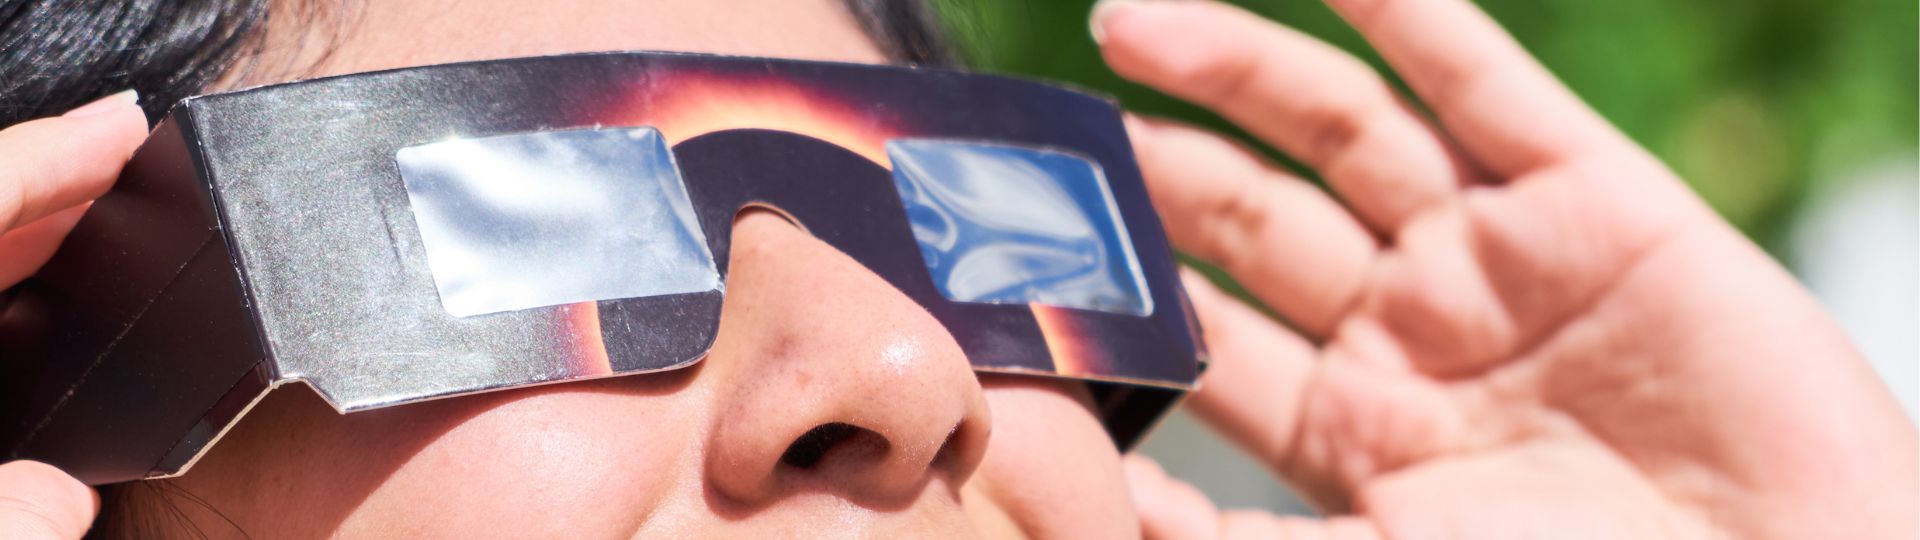 solar eclipse glasses on woman